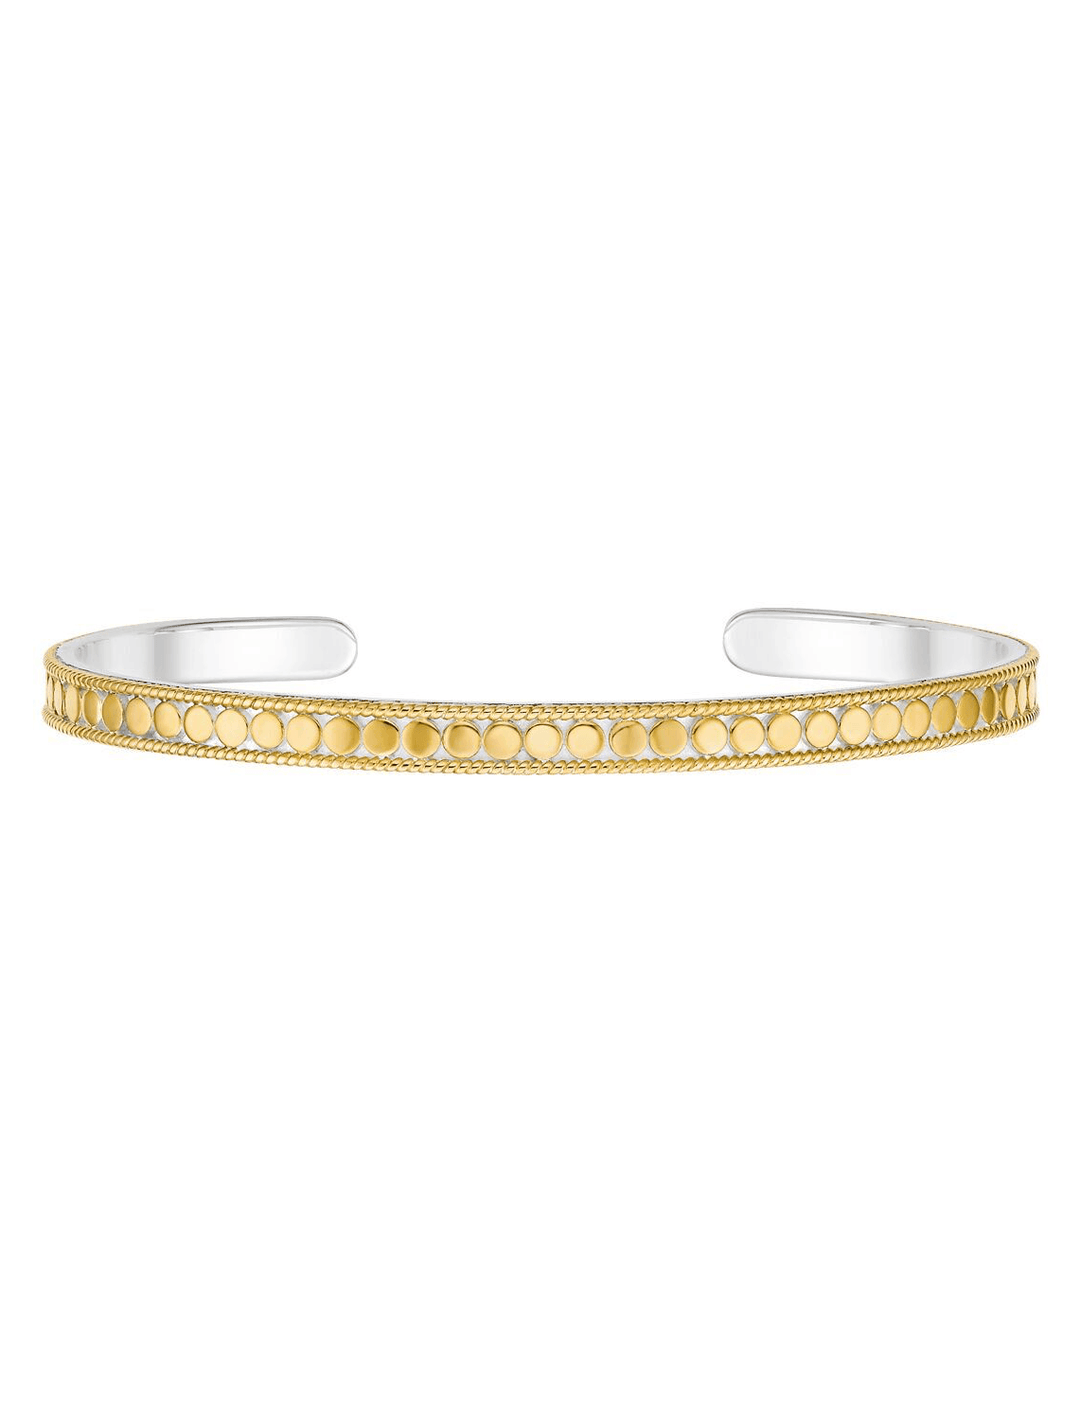 anna beck | authenticity stack cuff in gold